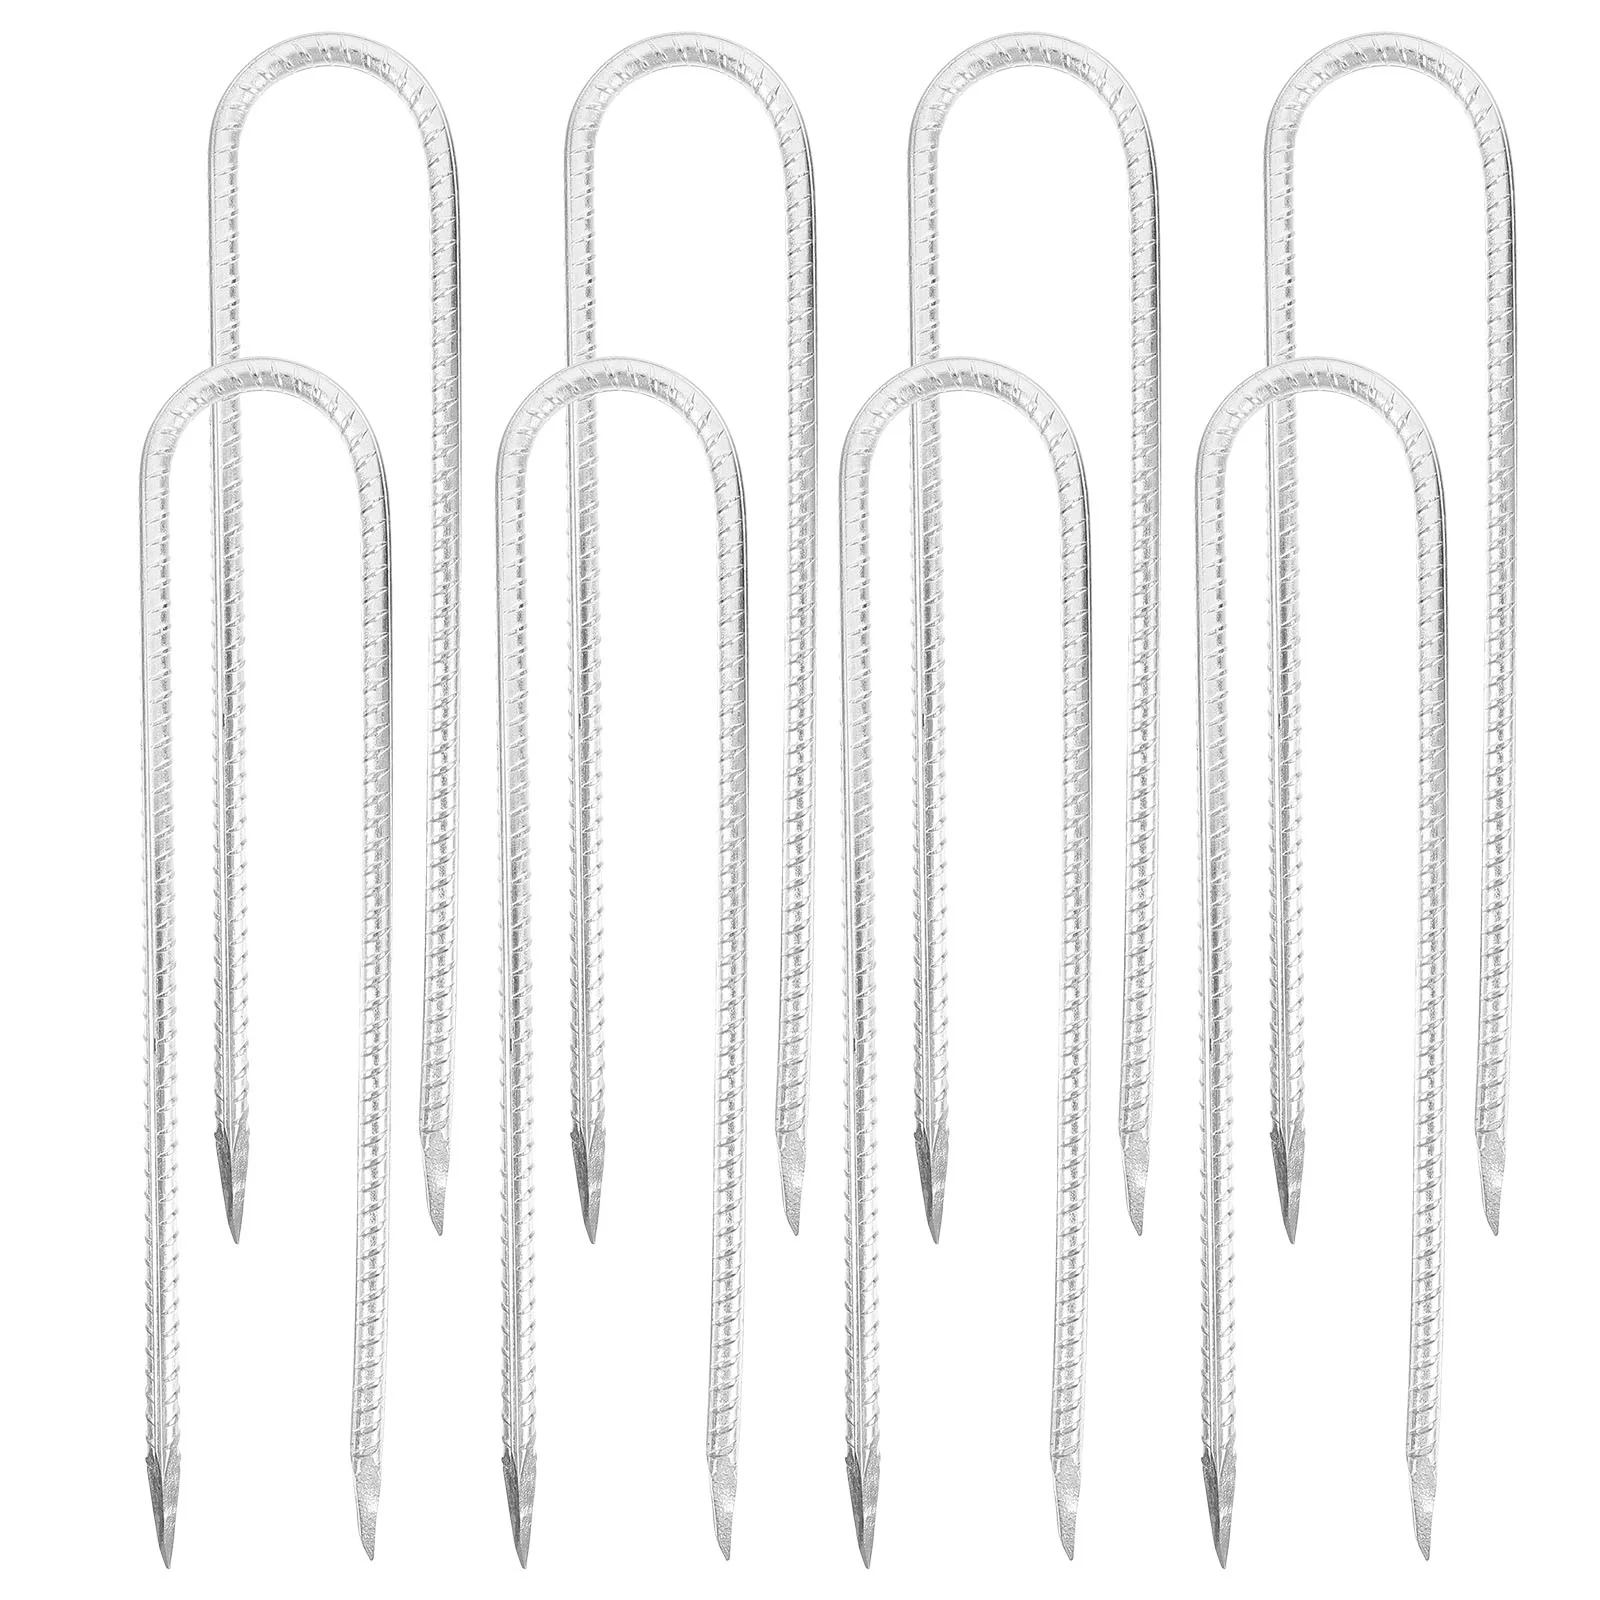 

8 Pcs Ground Reinforced Pile Tool Nails Steel DIY U-shaped Garden Stakes Gaskets Tent Fixing Tools Landscape Staples Pegs